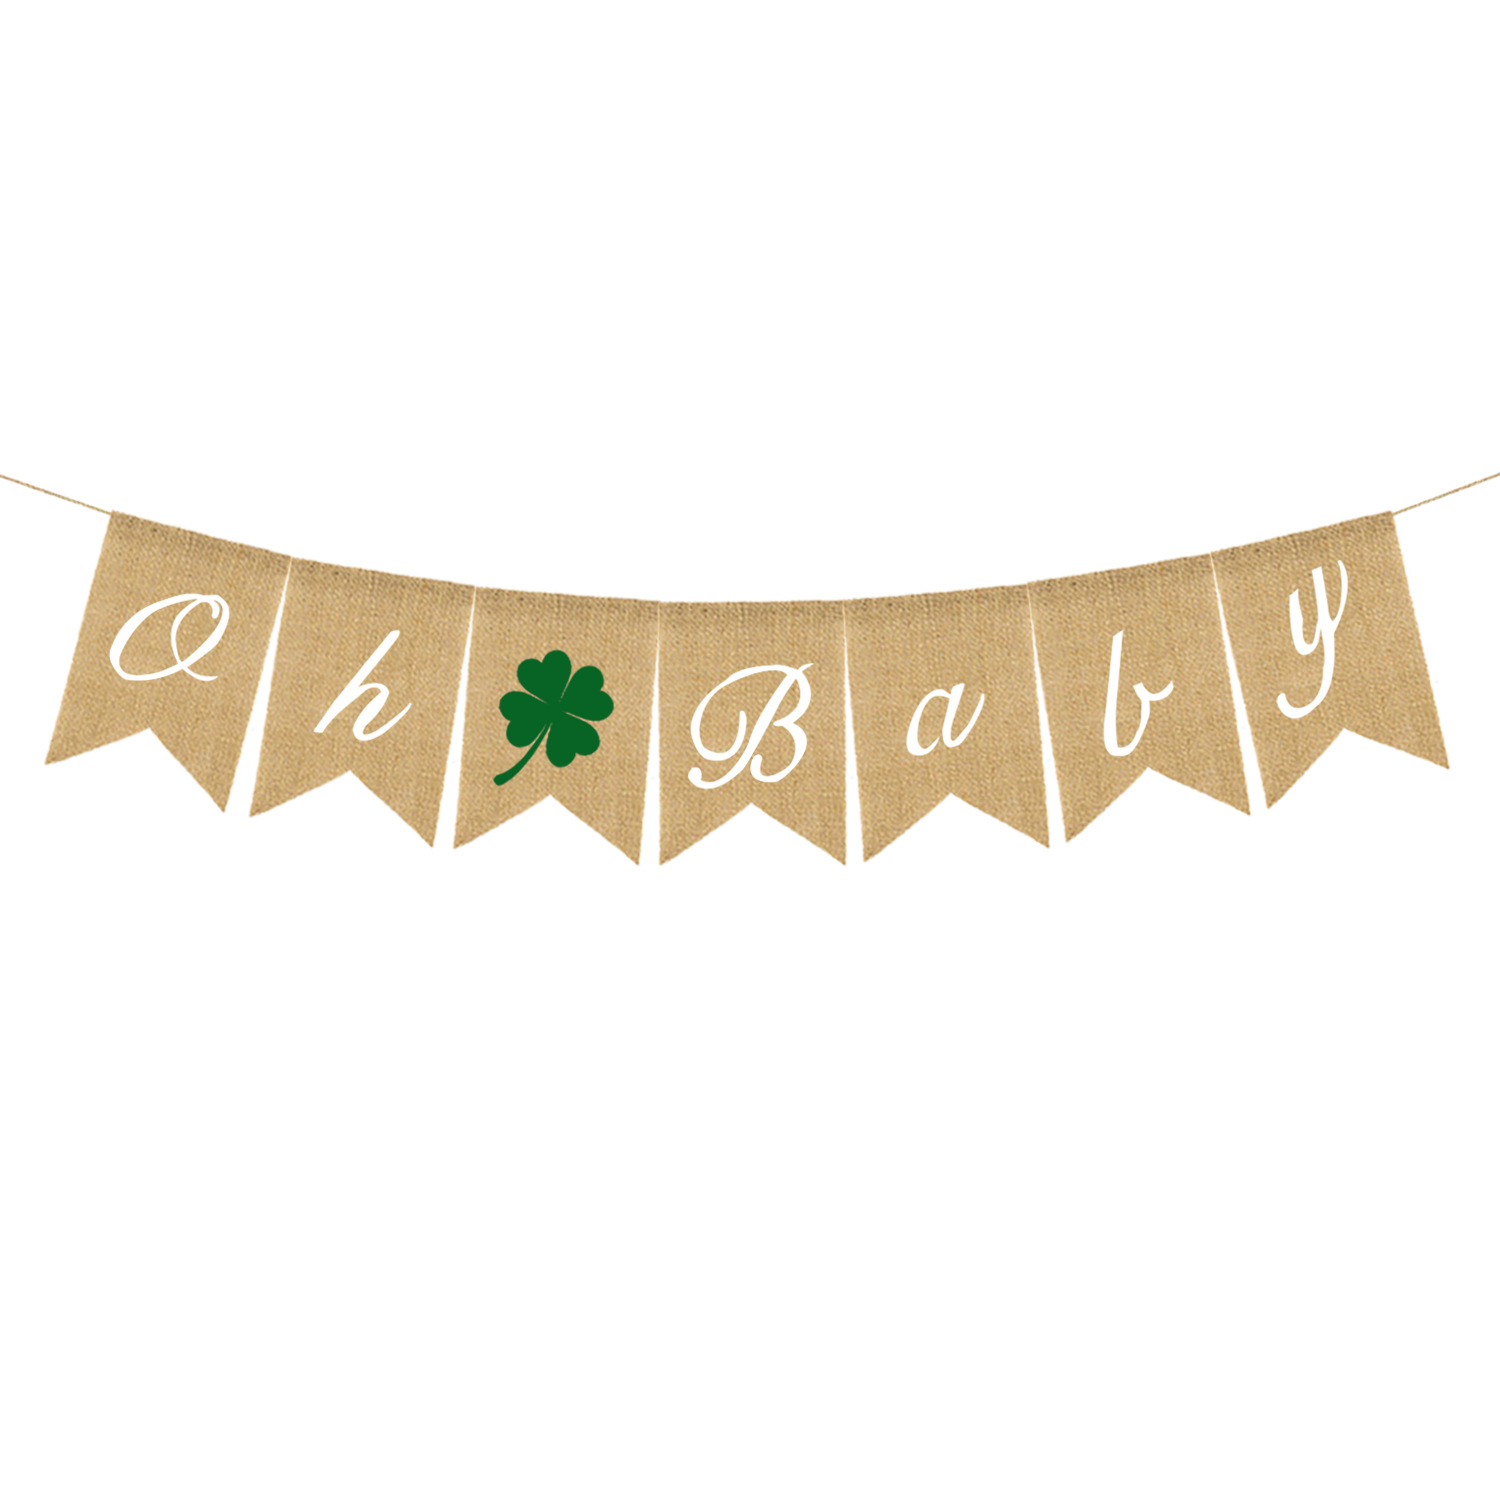 irish boys and girls baby birthday party pull flag oh baby four-leaf clover linen swallowtail flag